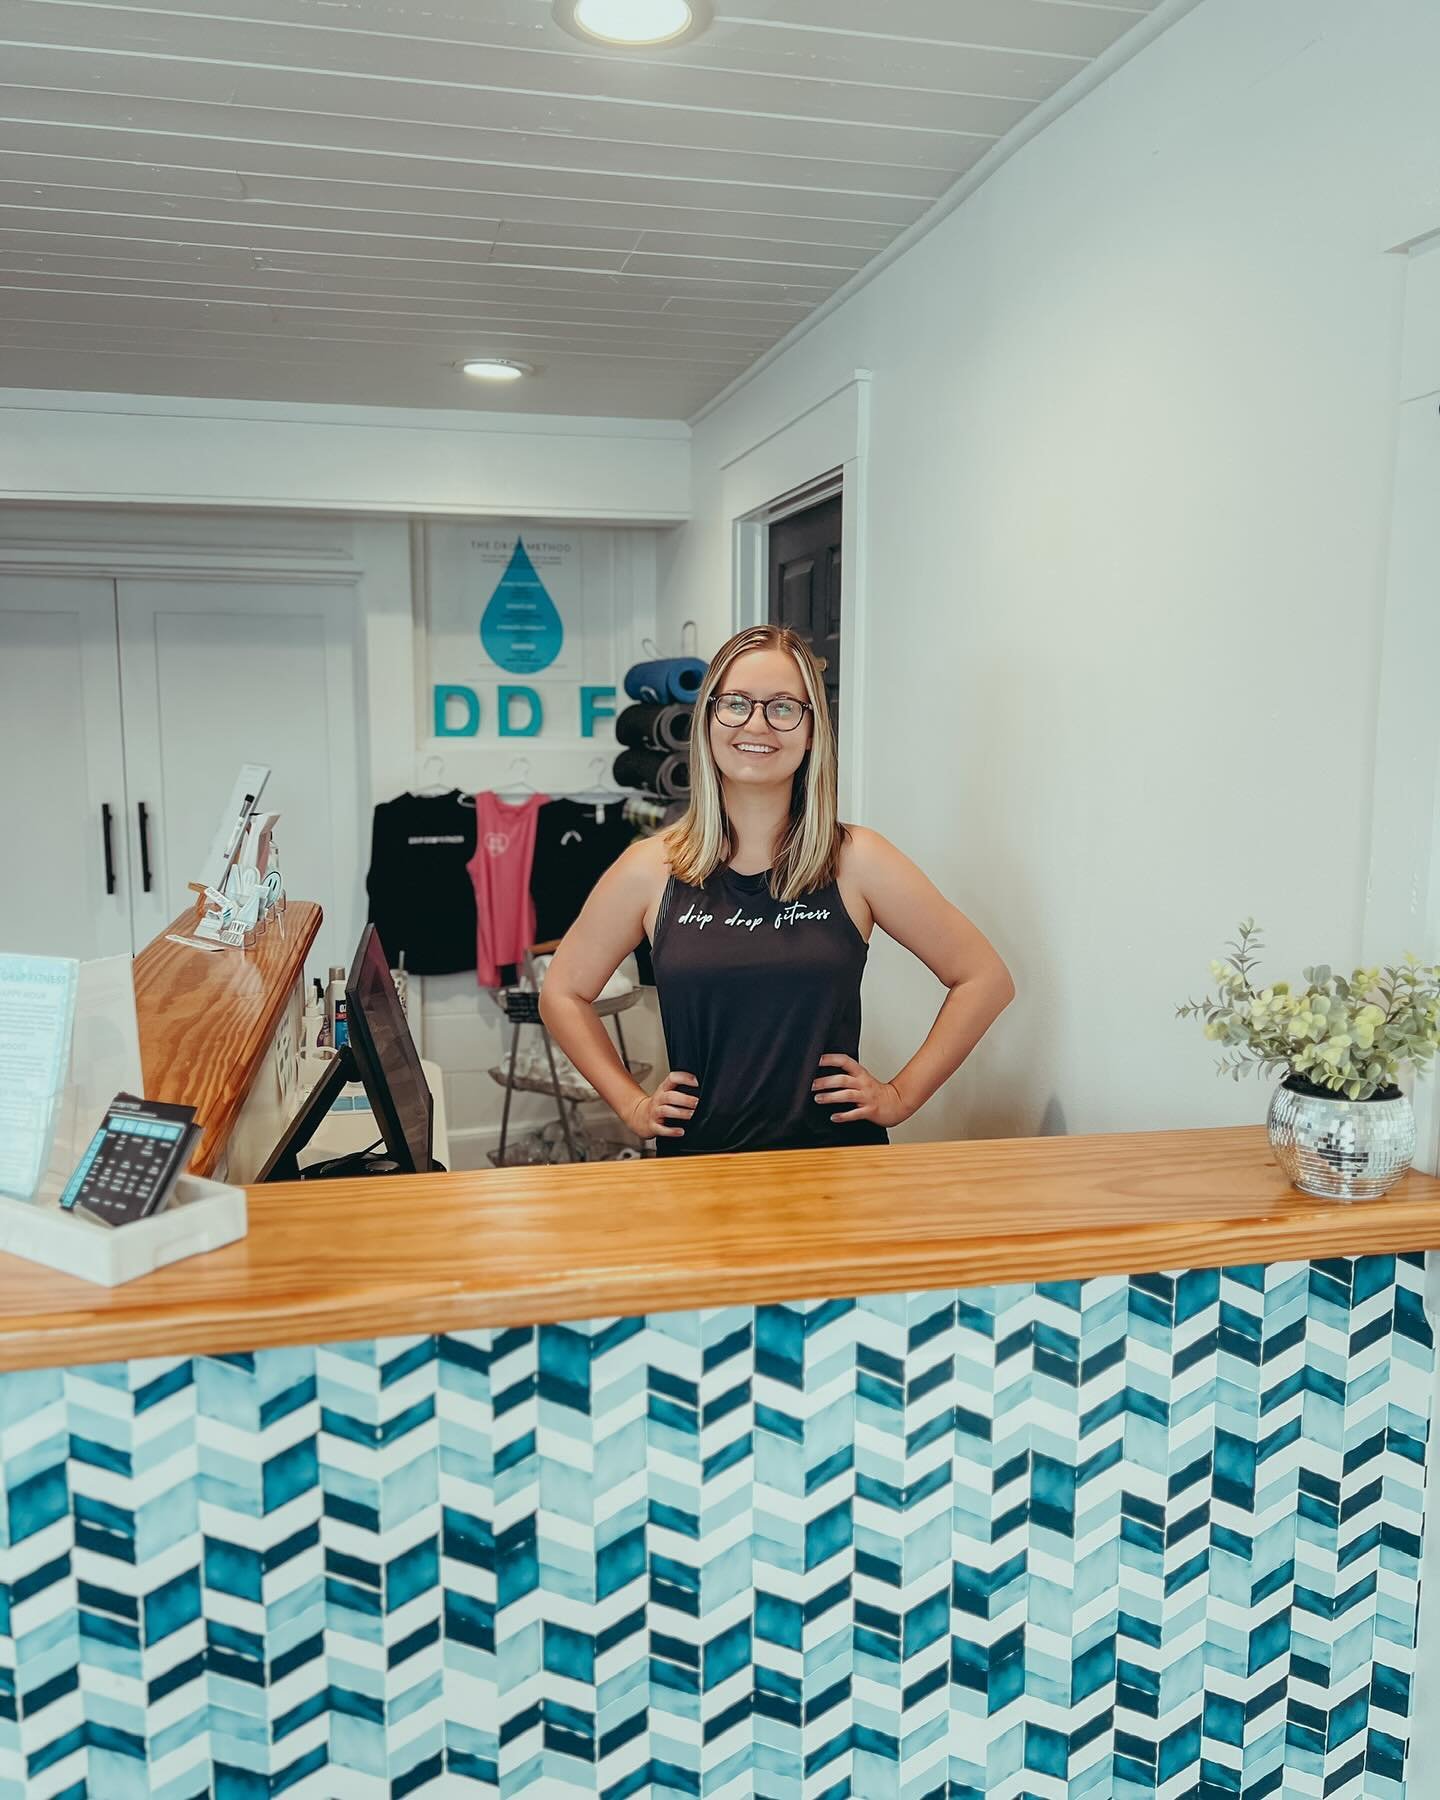 We&rsquo;ve got someone to introduce you to! Help us welcome @norris_boyd to the DDF team! 🩵🪩 💦
Norris is originally from Palm Harbor, Florida, and recently graduated from FSU with her Masters degree in STEM Teaching. Norris fell in love with the 